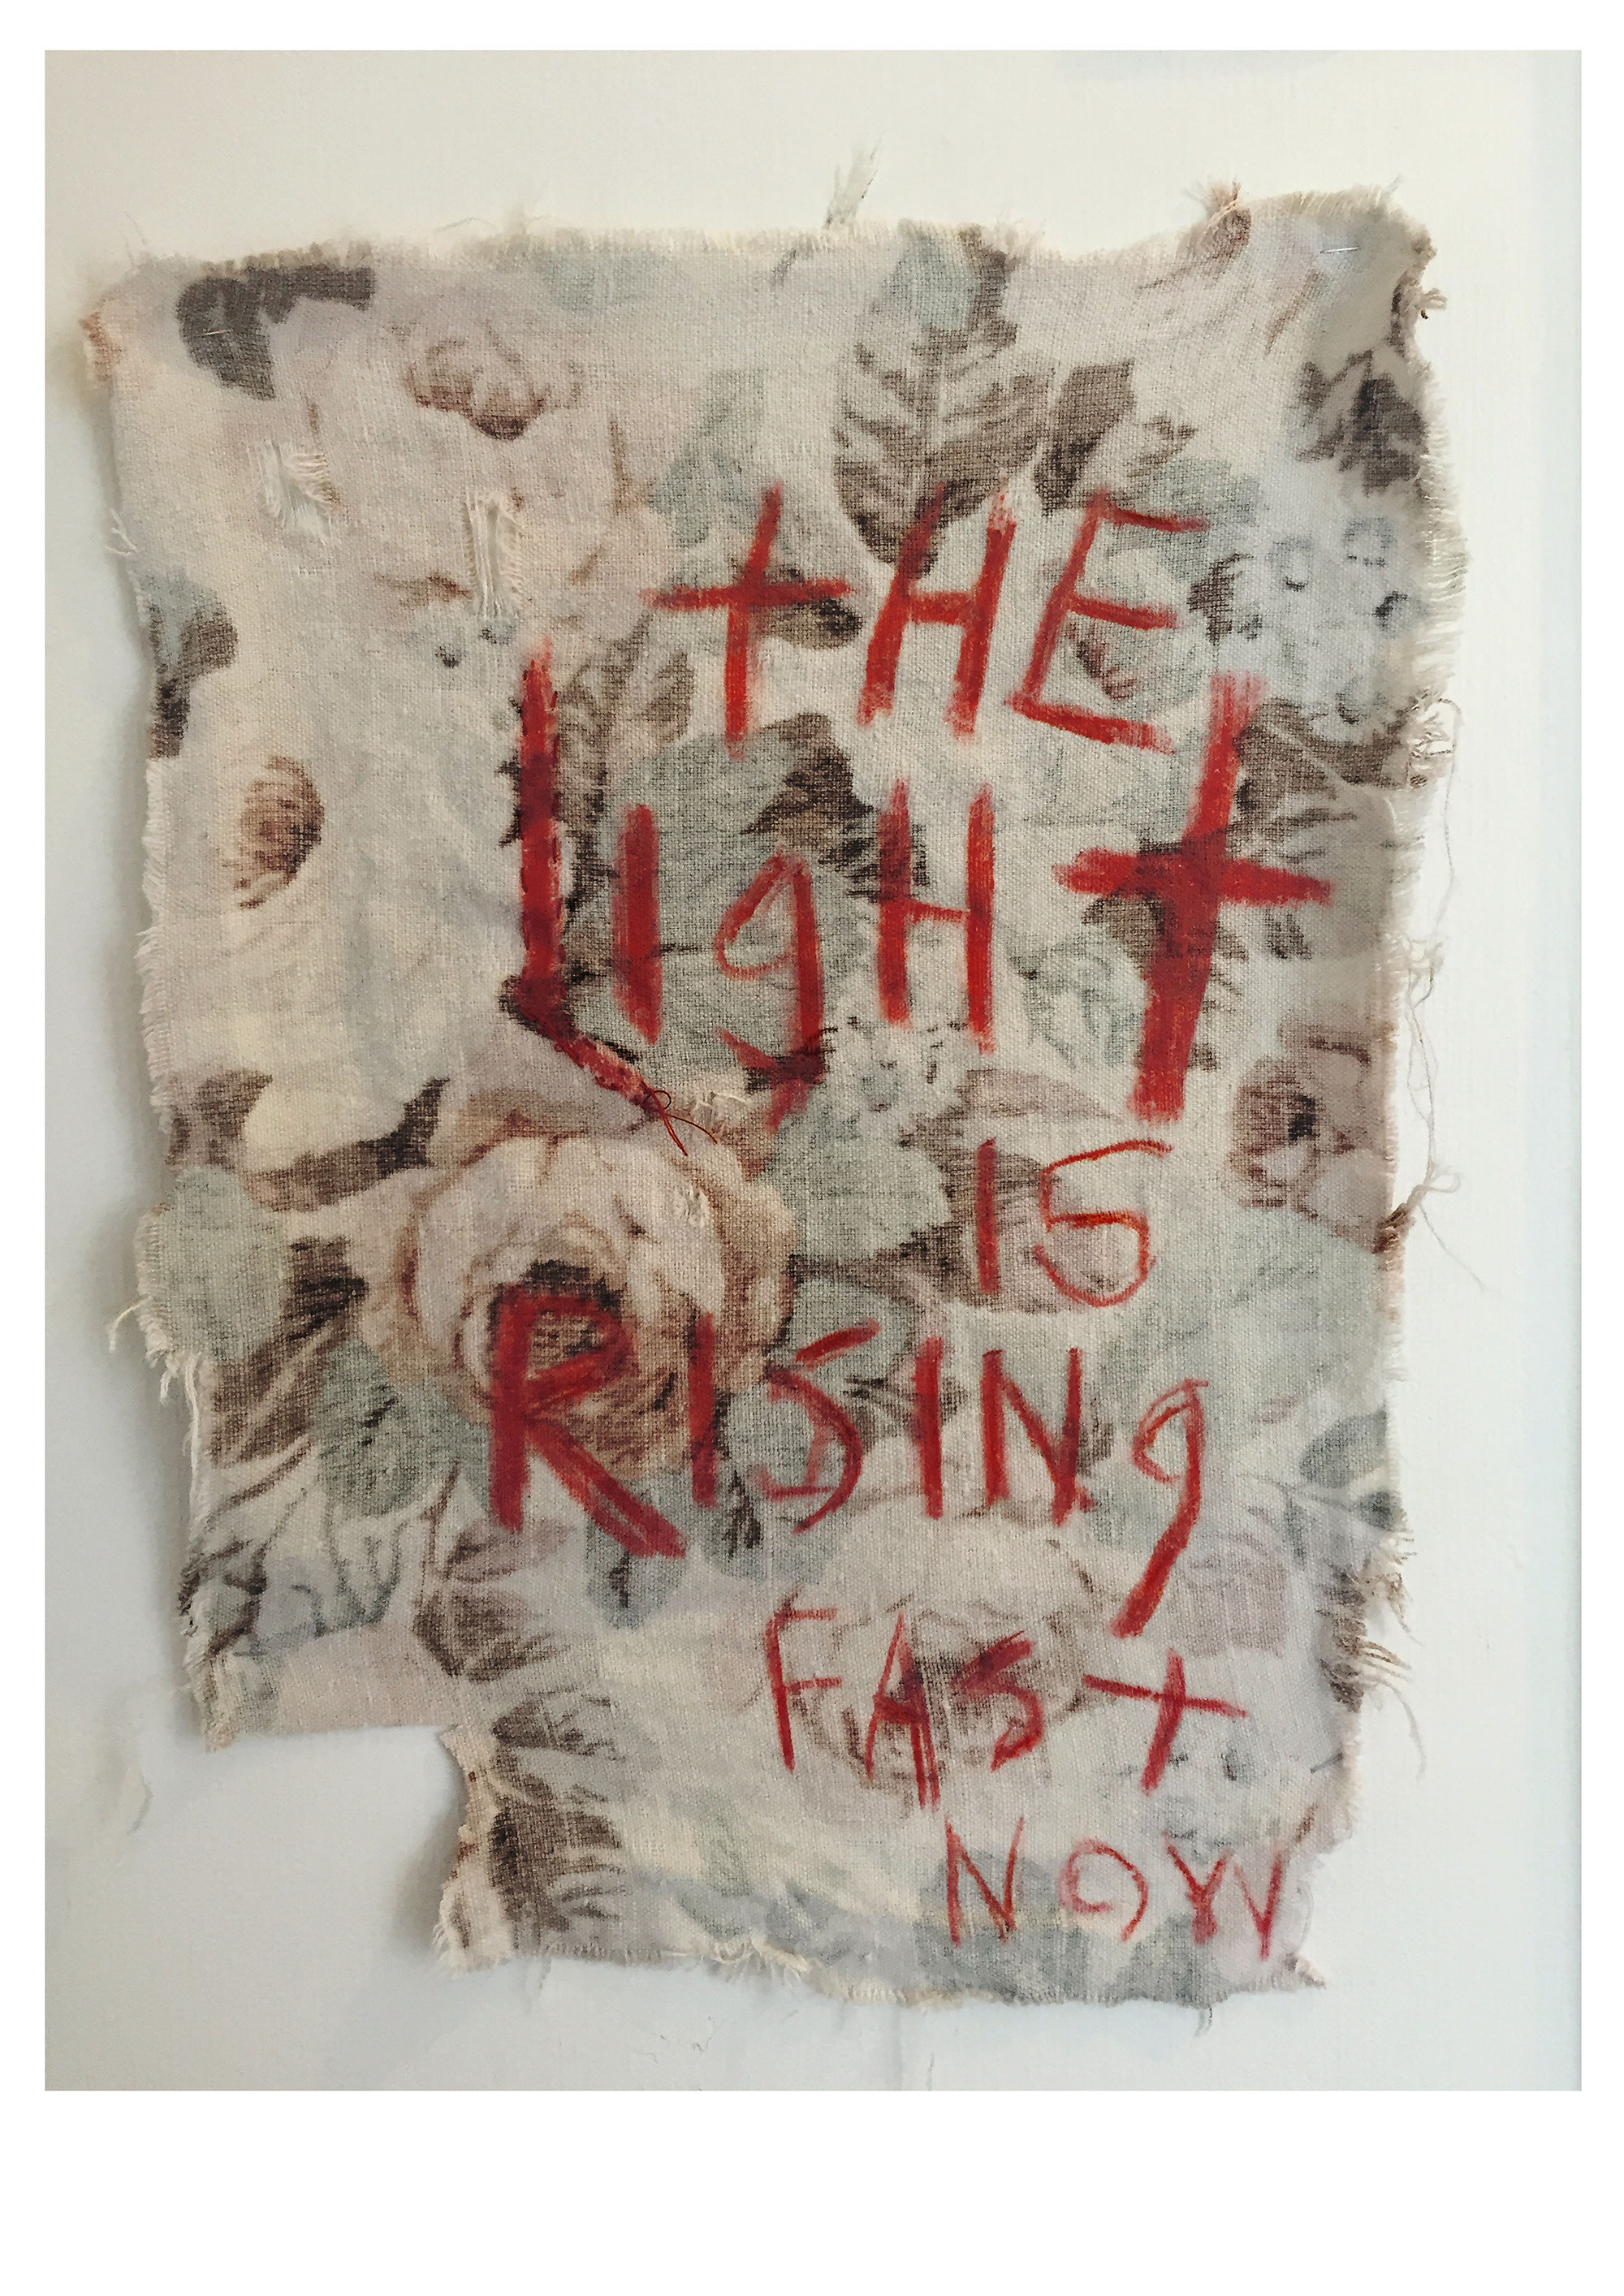 The light is rising fast now, 2016